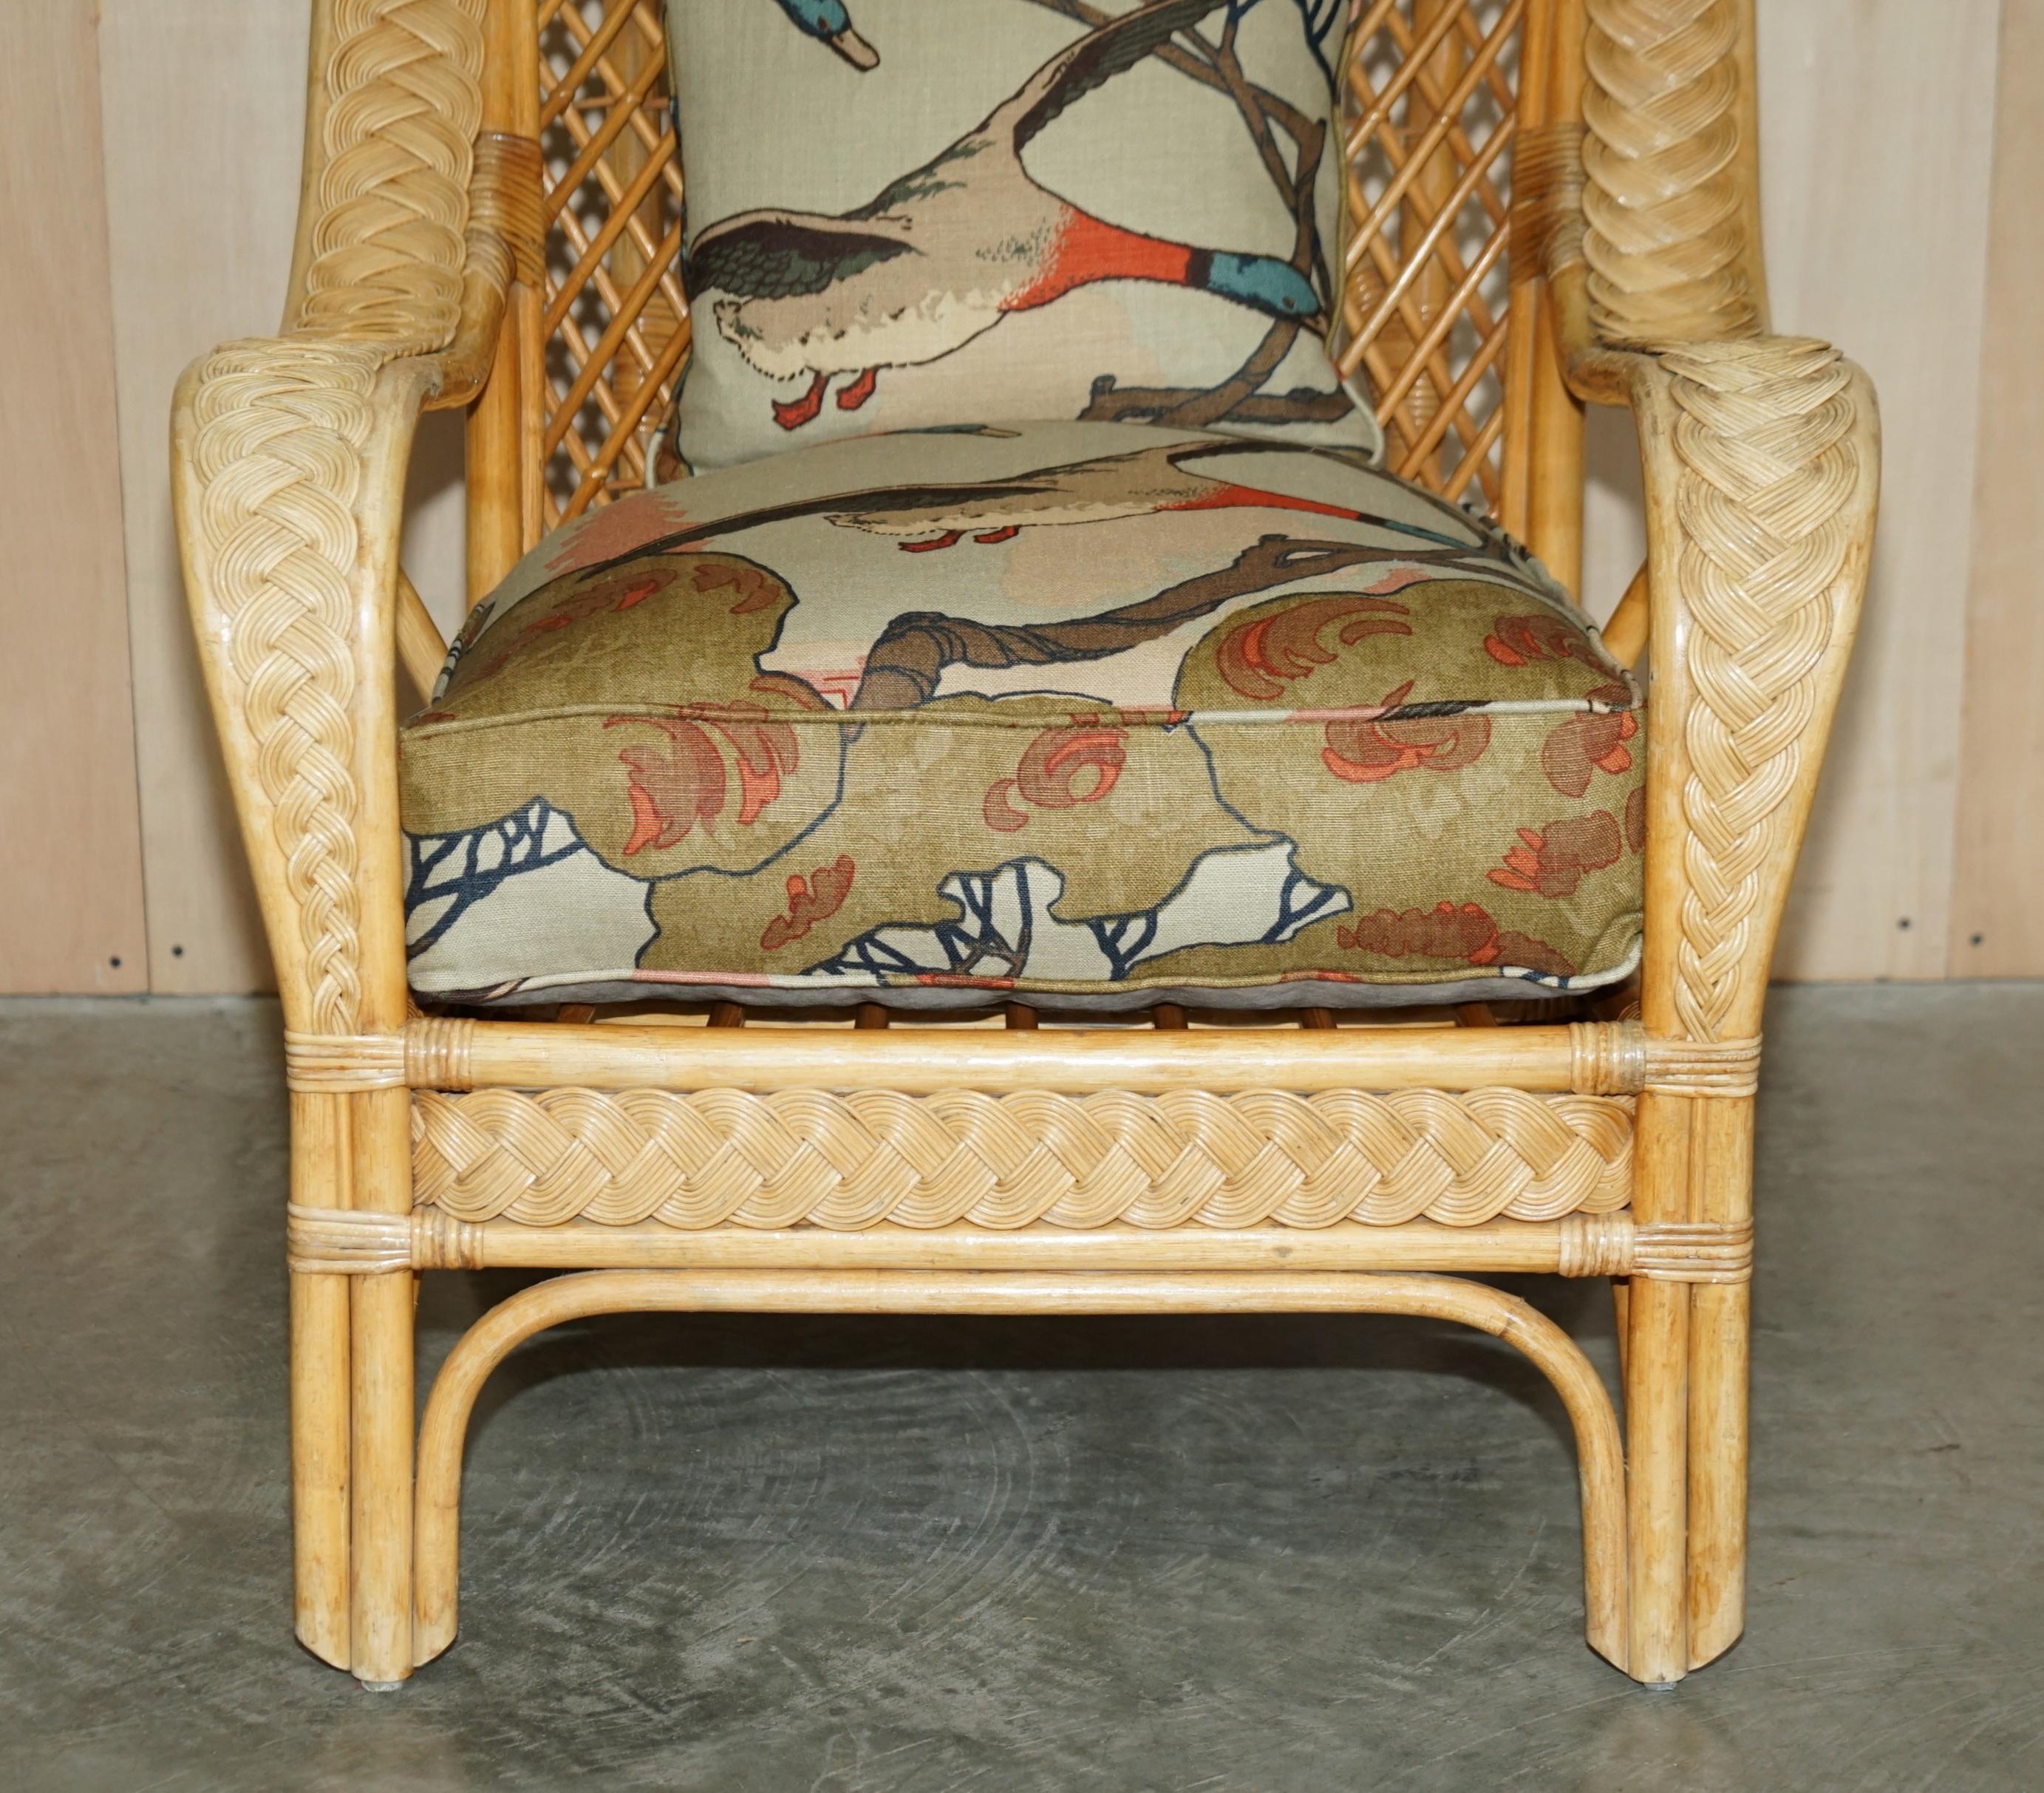 WICKER ARMCHAIRS STOOL TABLE SUITE UPHOLSTERED WiTH MULBERRY FLYING DUCKS FABRIC For Sale 8